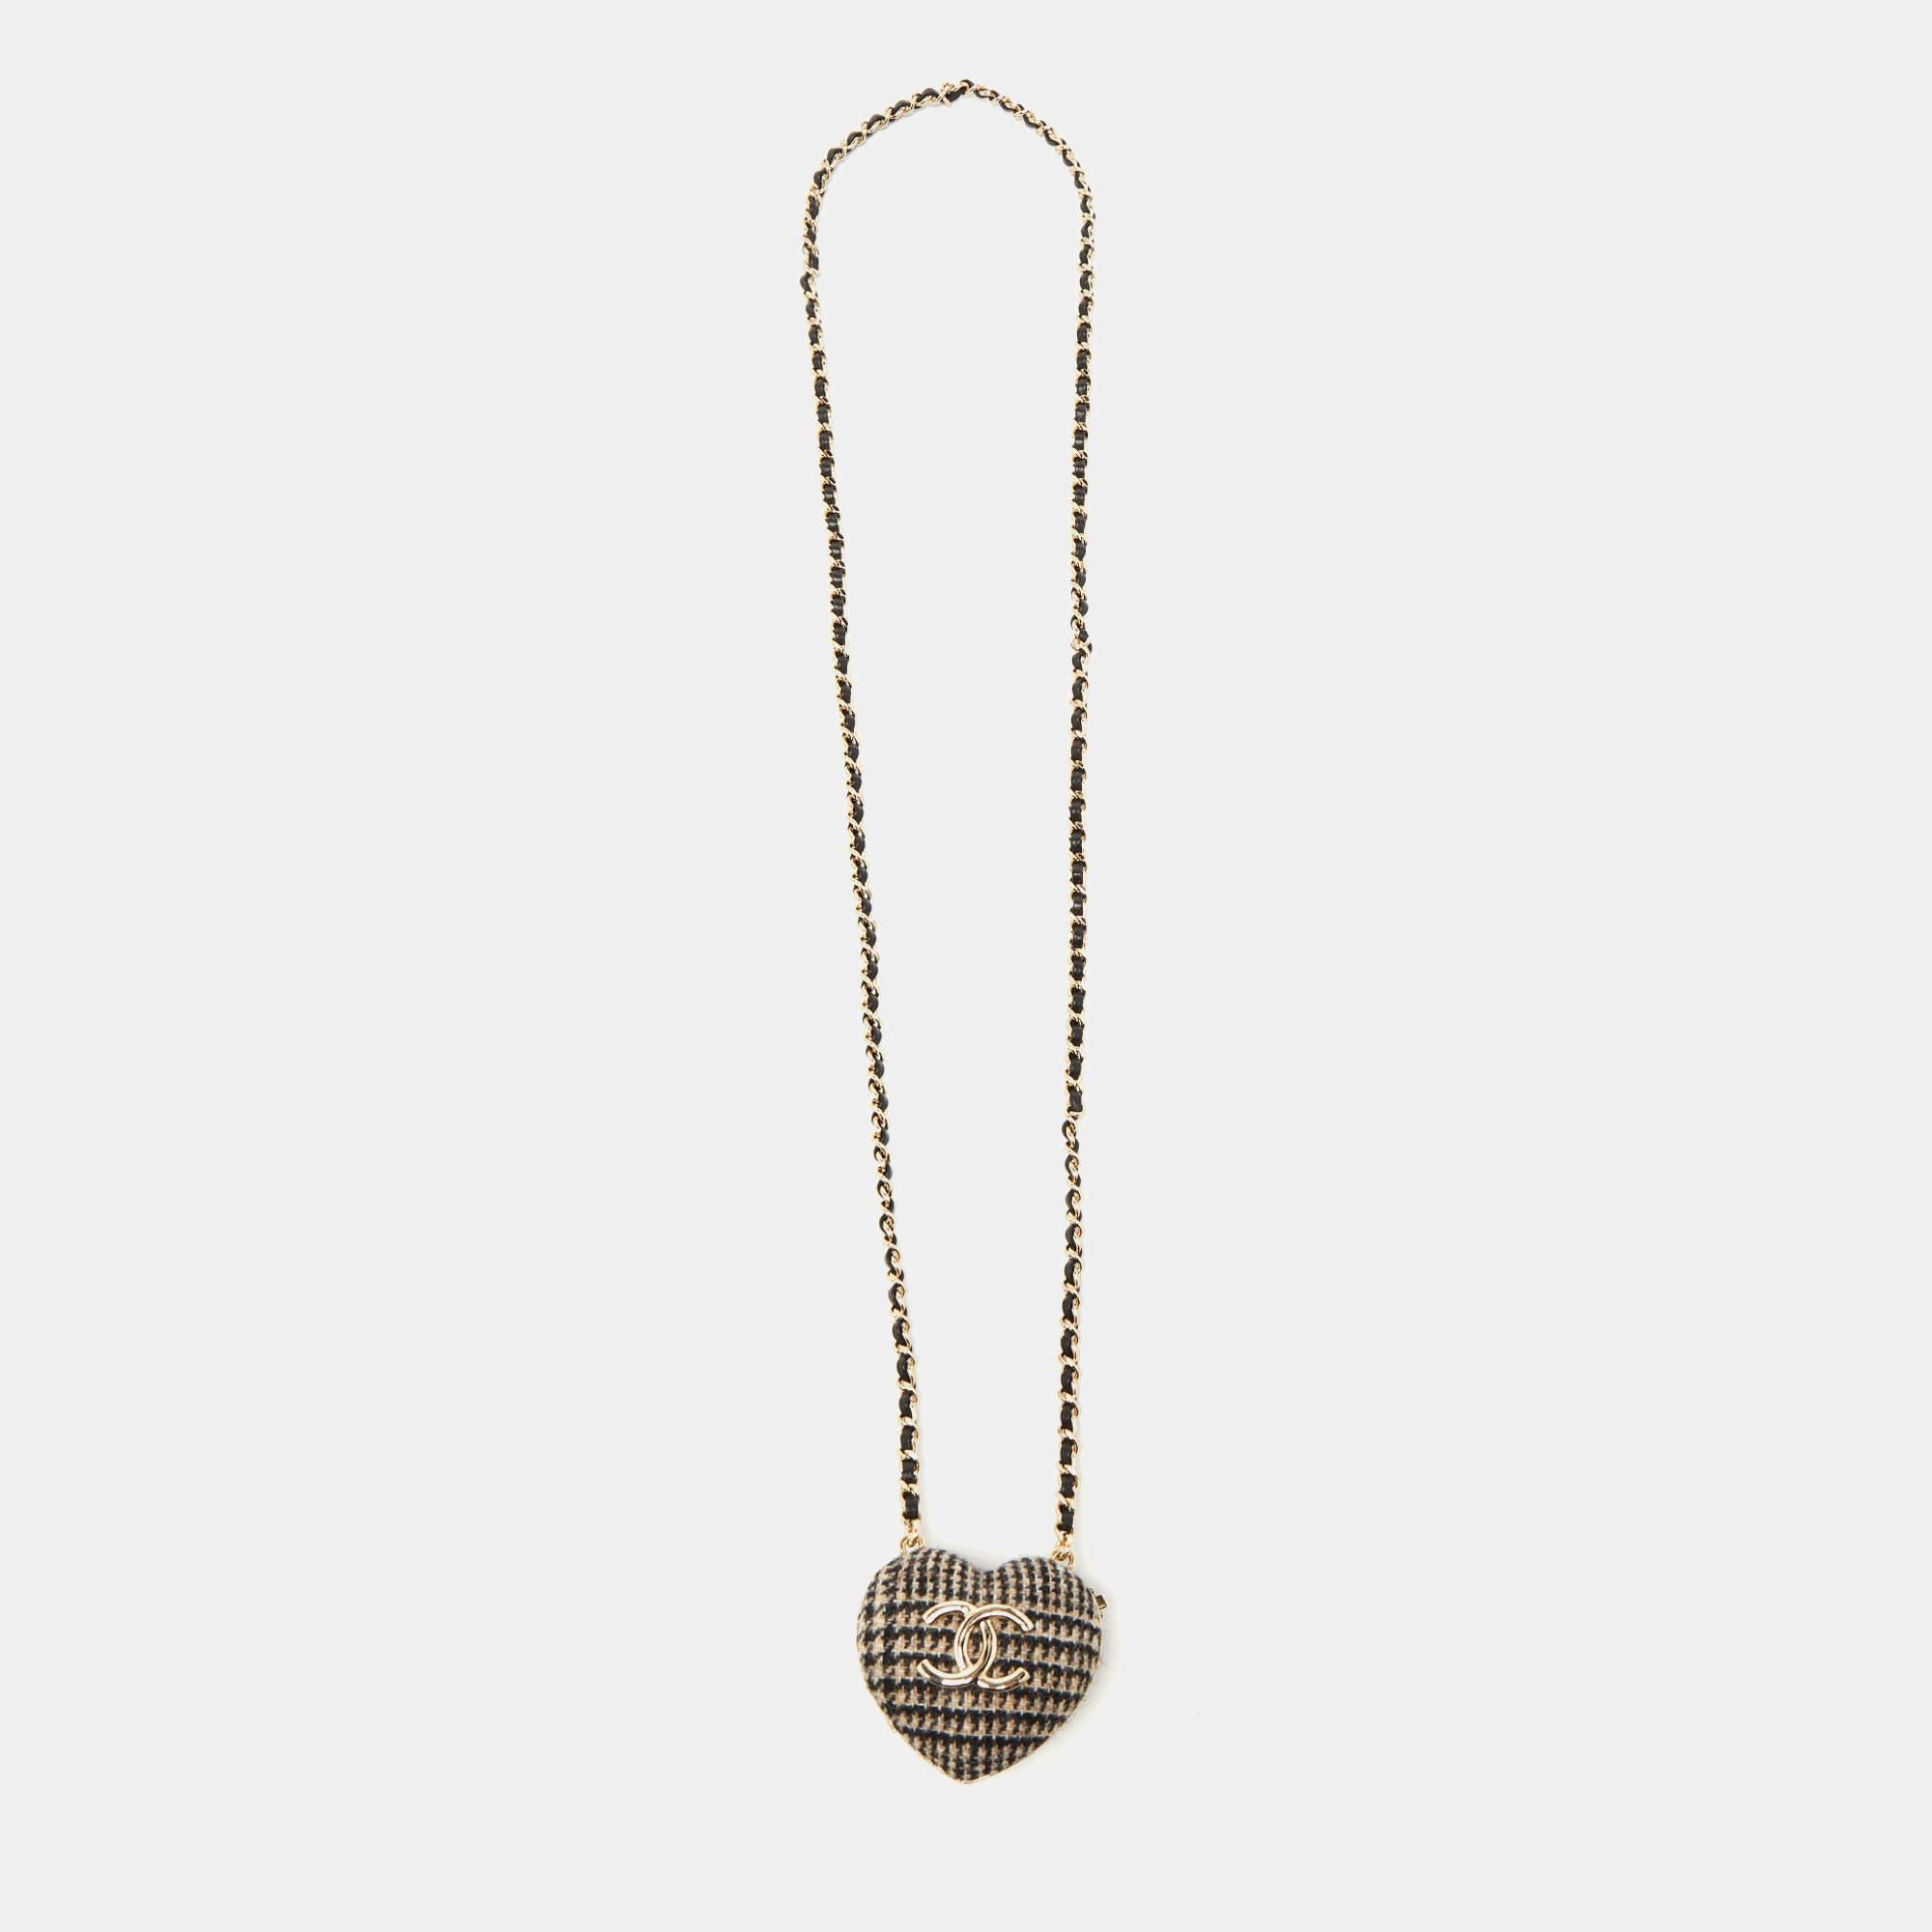 This necklace from Chanel imparts elegance through its distinctive design. It speaks of impeccable style and ultimate luxury. Flaunt your discerning fashion taste by buying this beauty today!

Includes: Original Box

